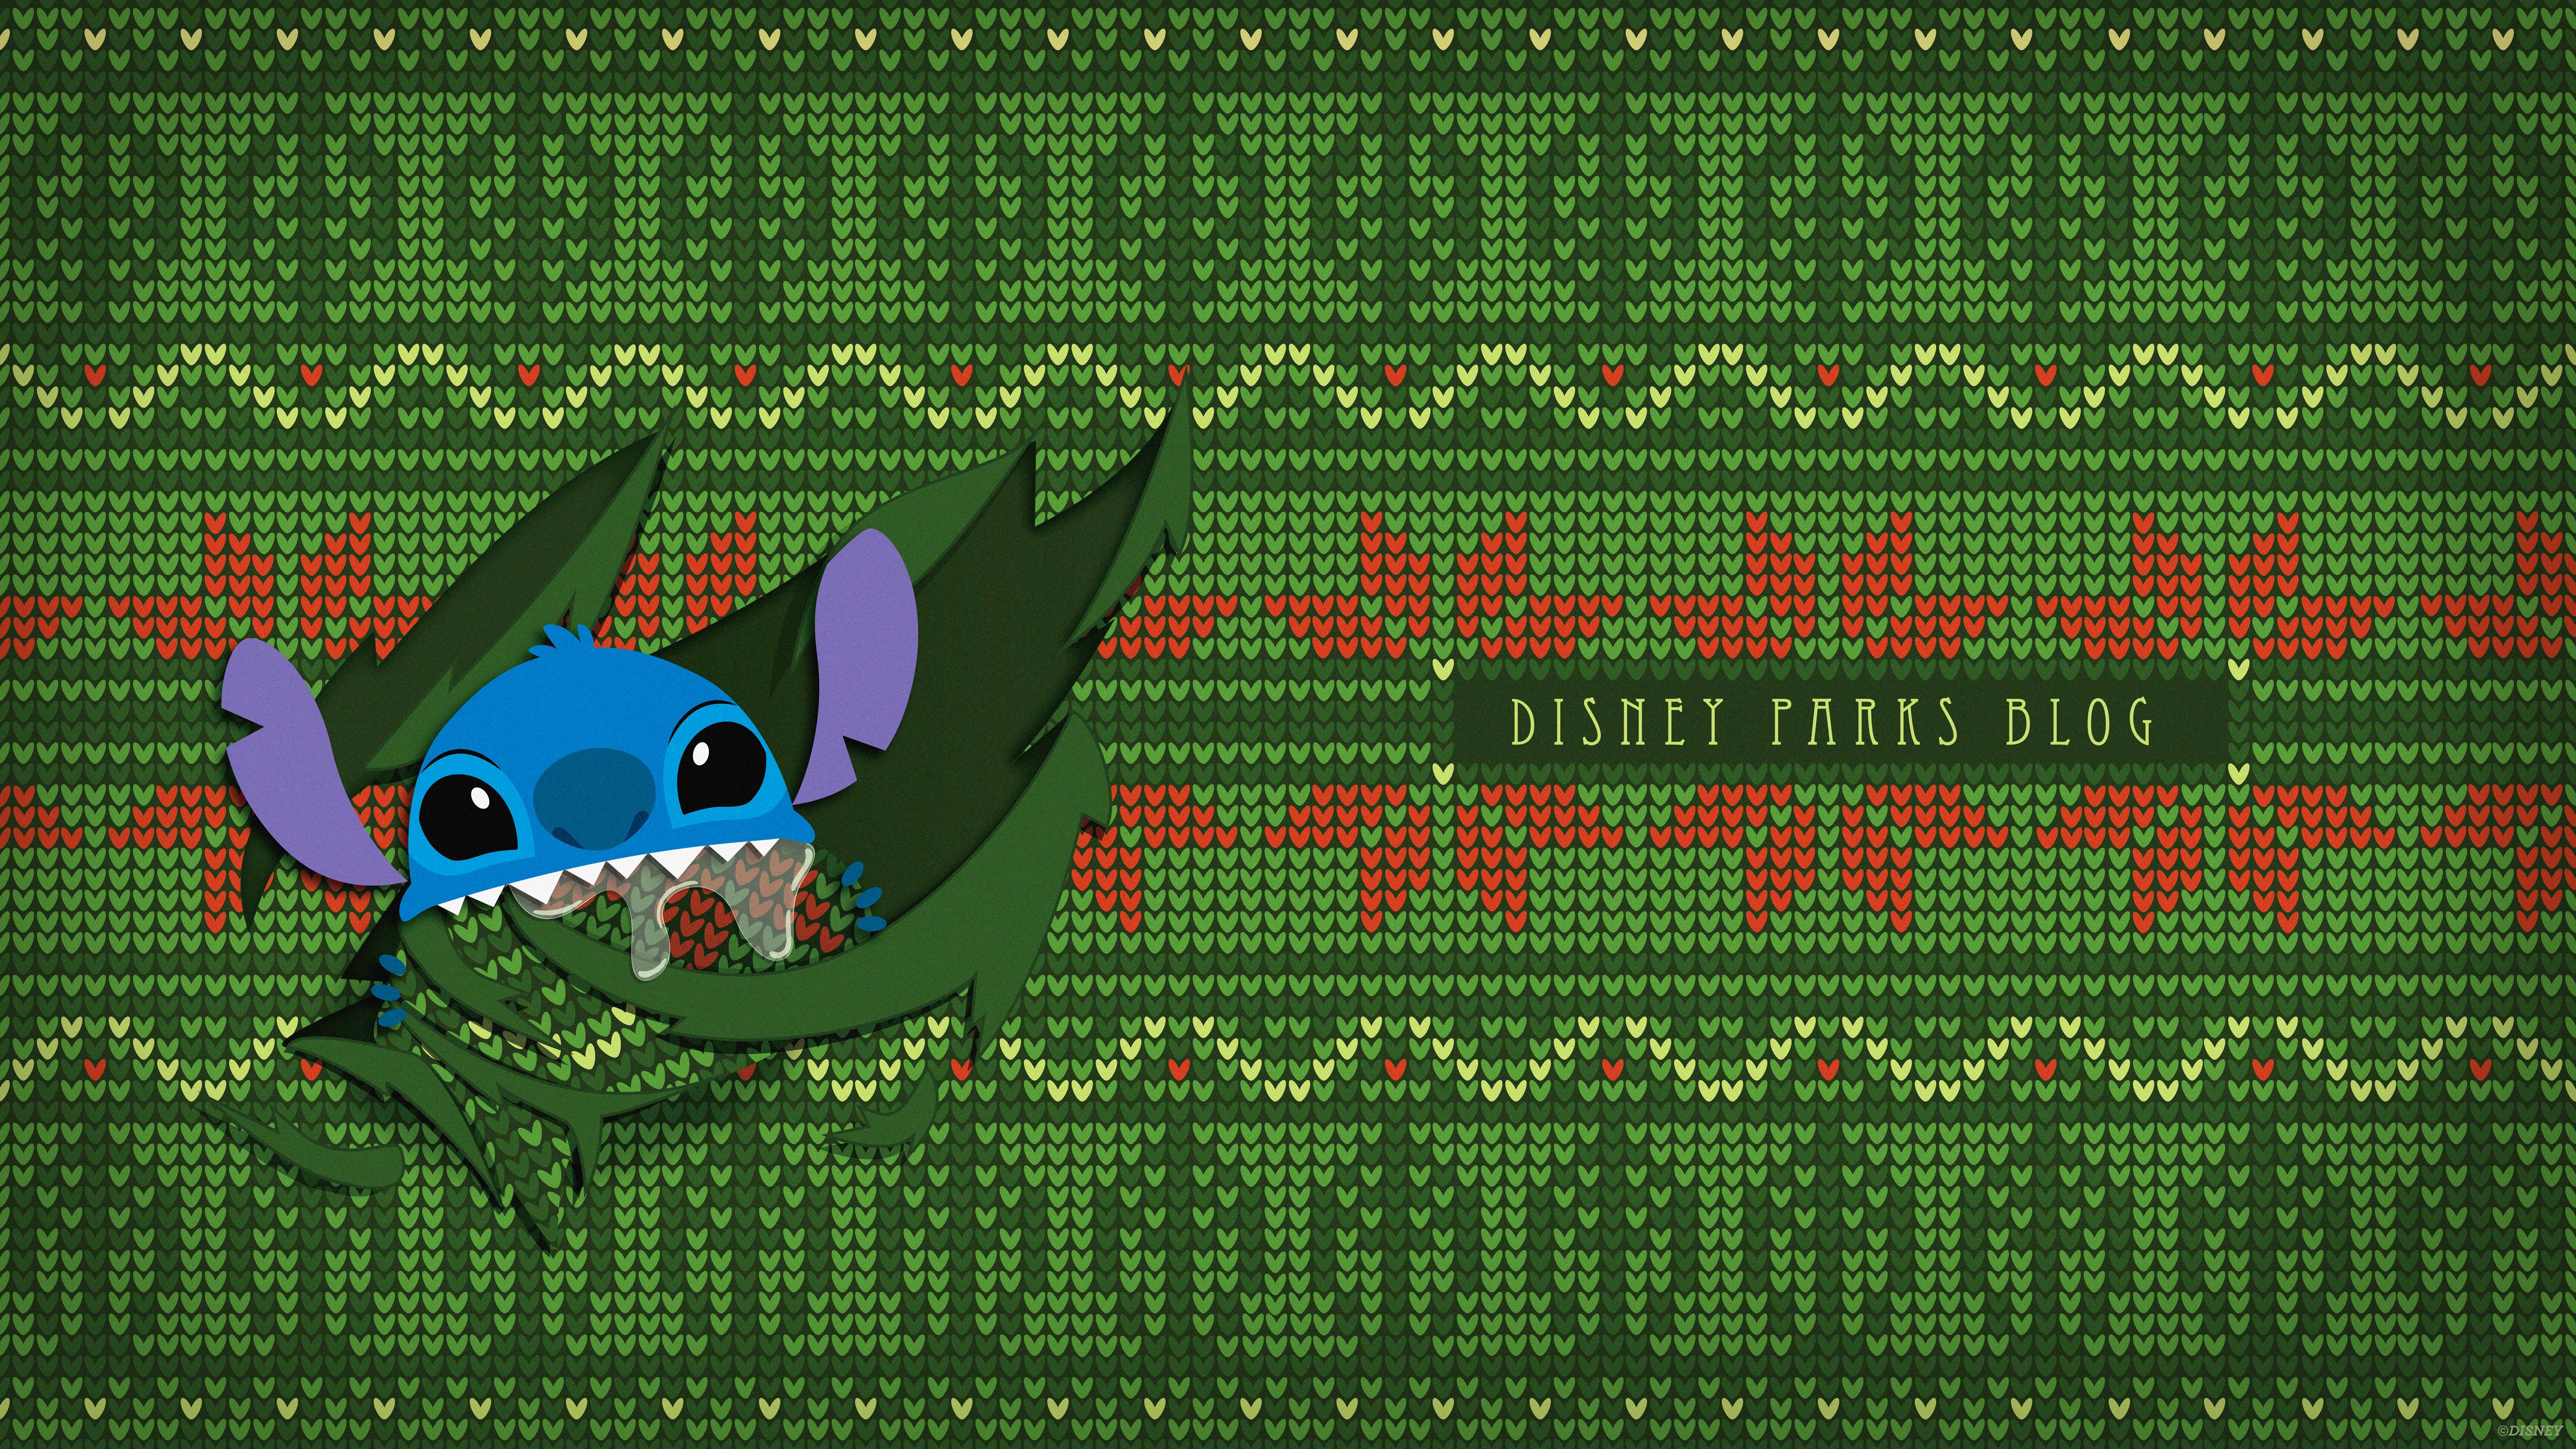 More Wallpaper To Ring In the Holiday Season Courtesy of Disney Parks Blog